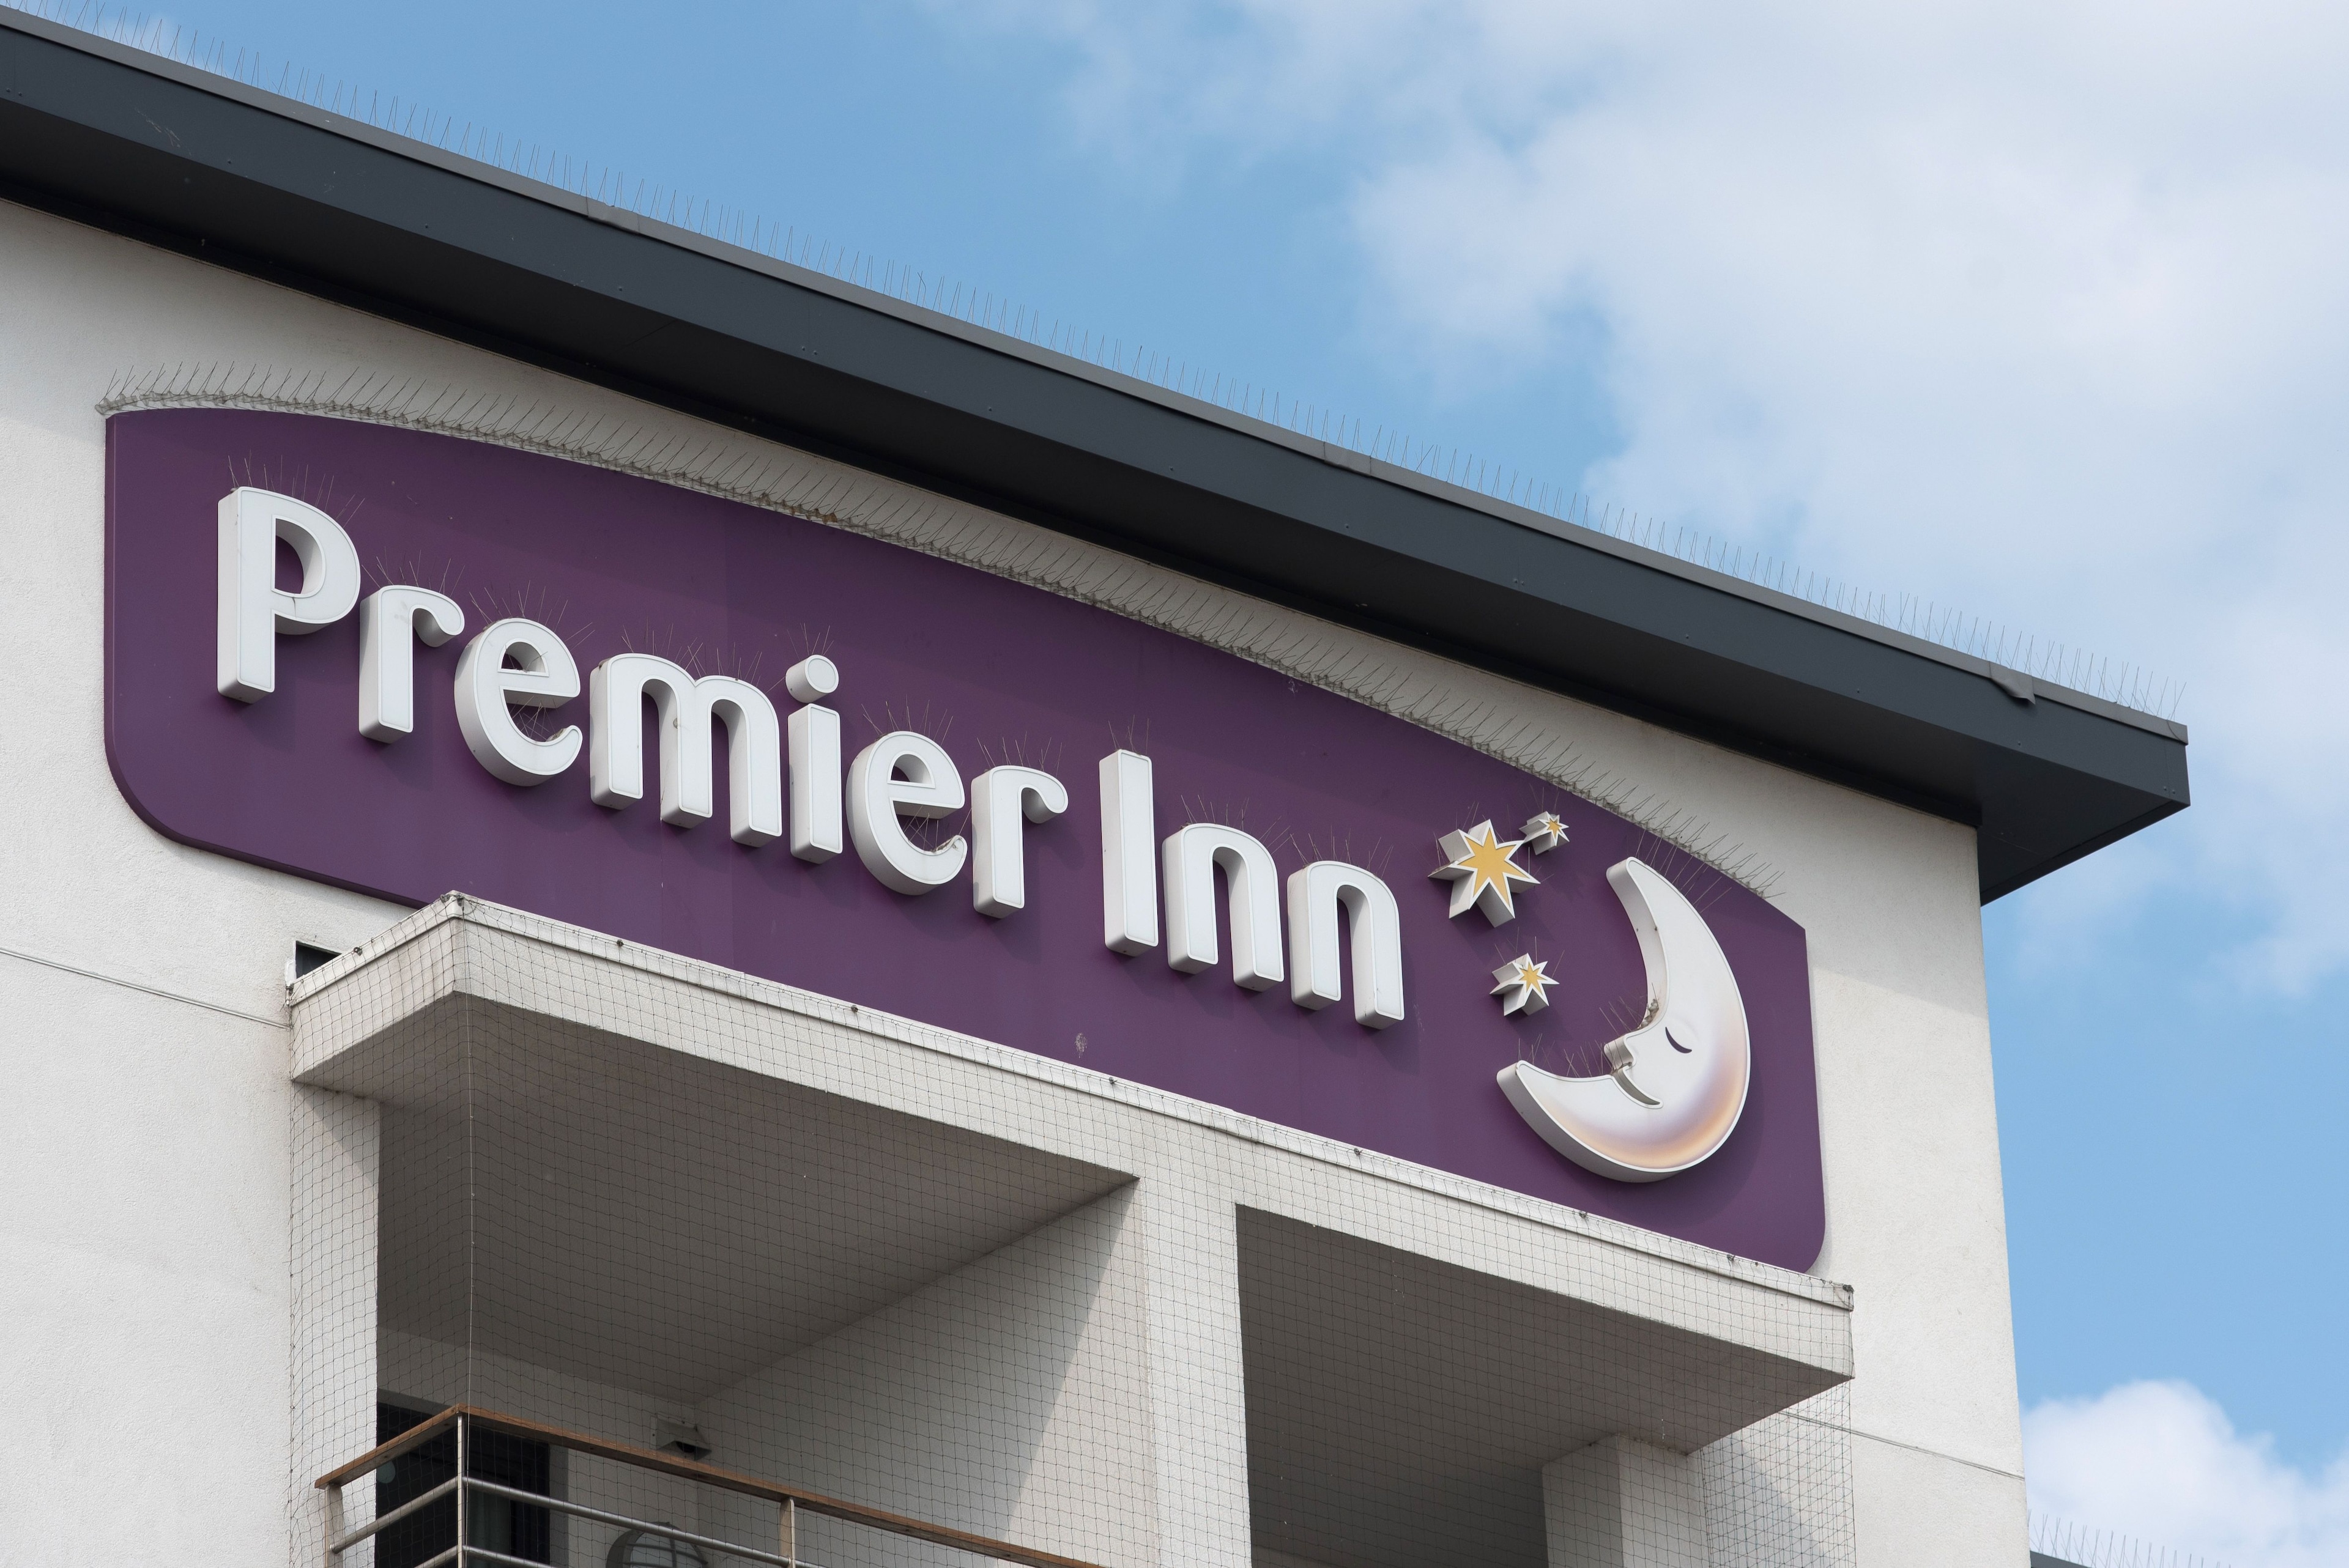 A Premier Inn logo above one of its hotels